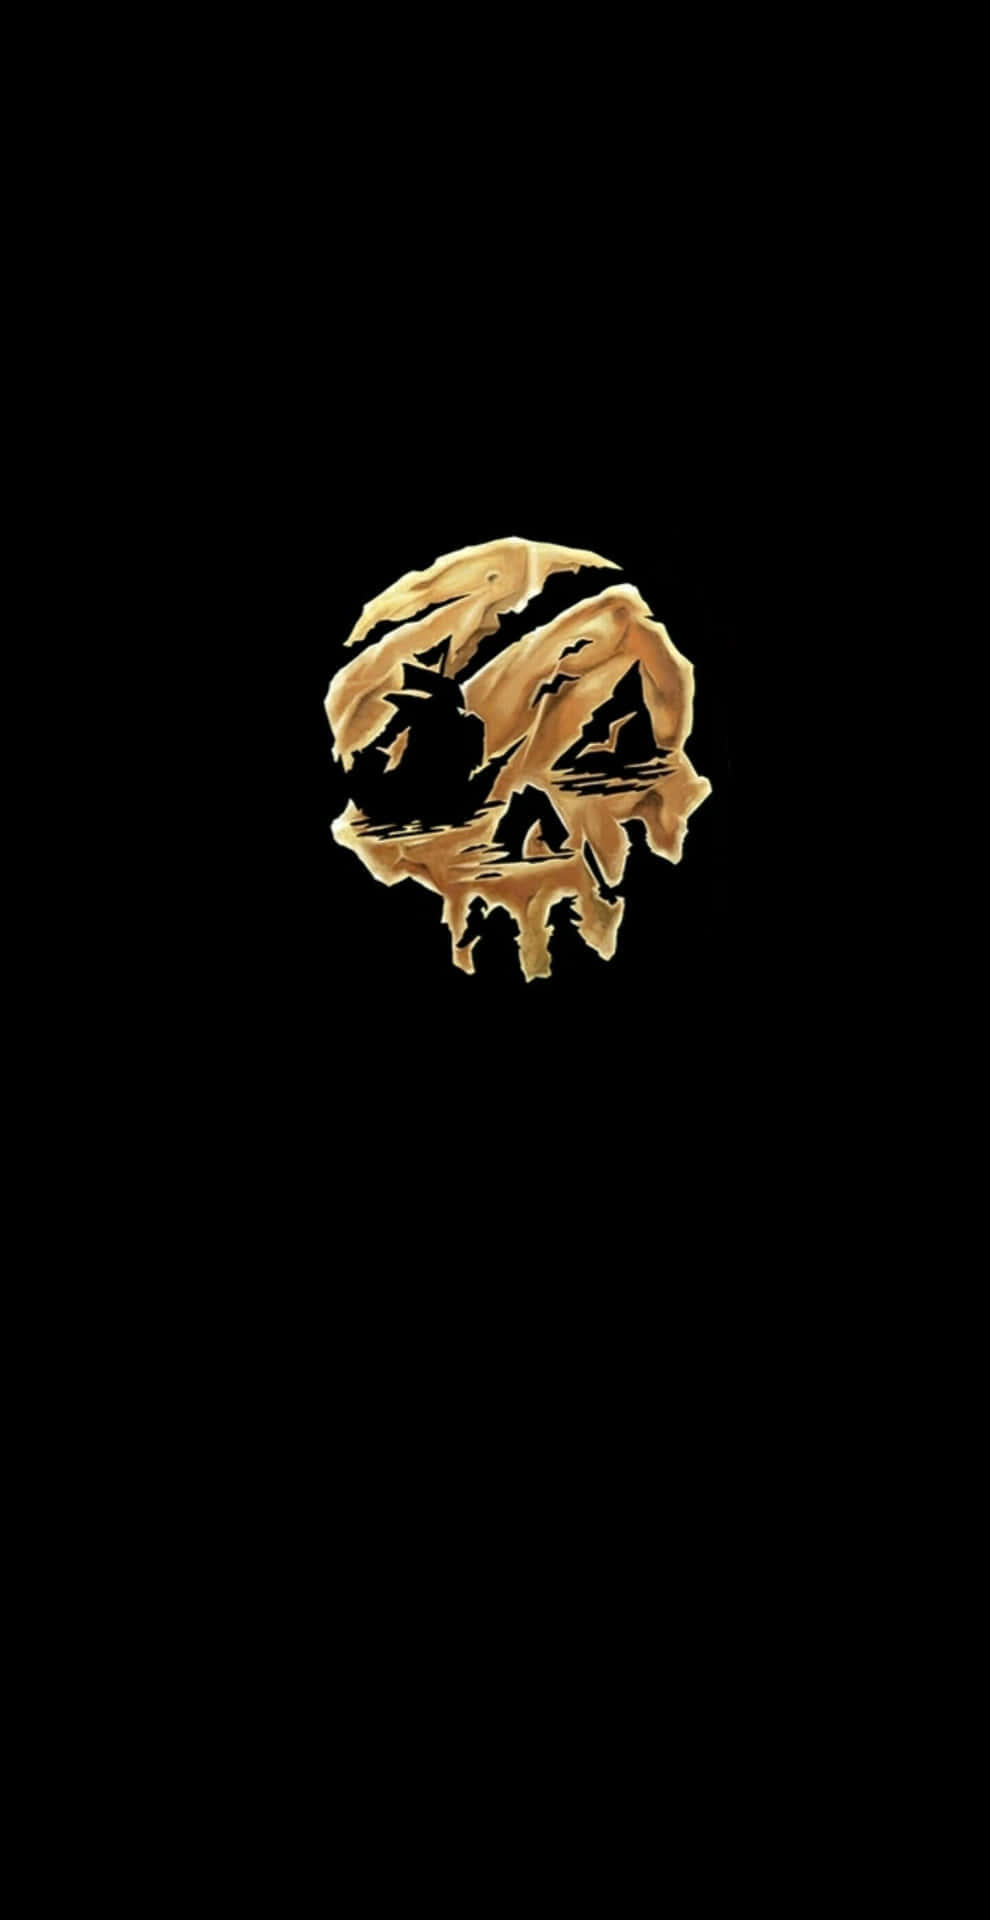 Experience the High Seas on Your Phone with Sea Of Thieves Wallpaper